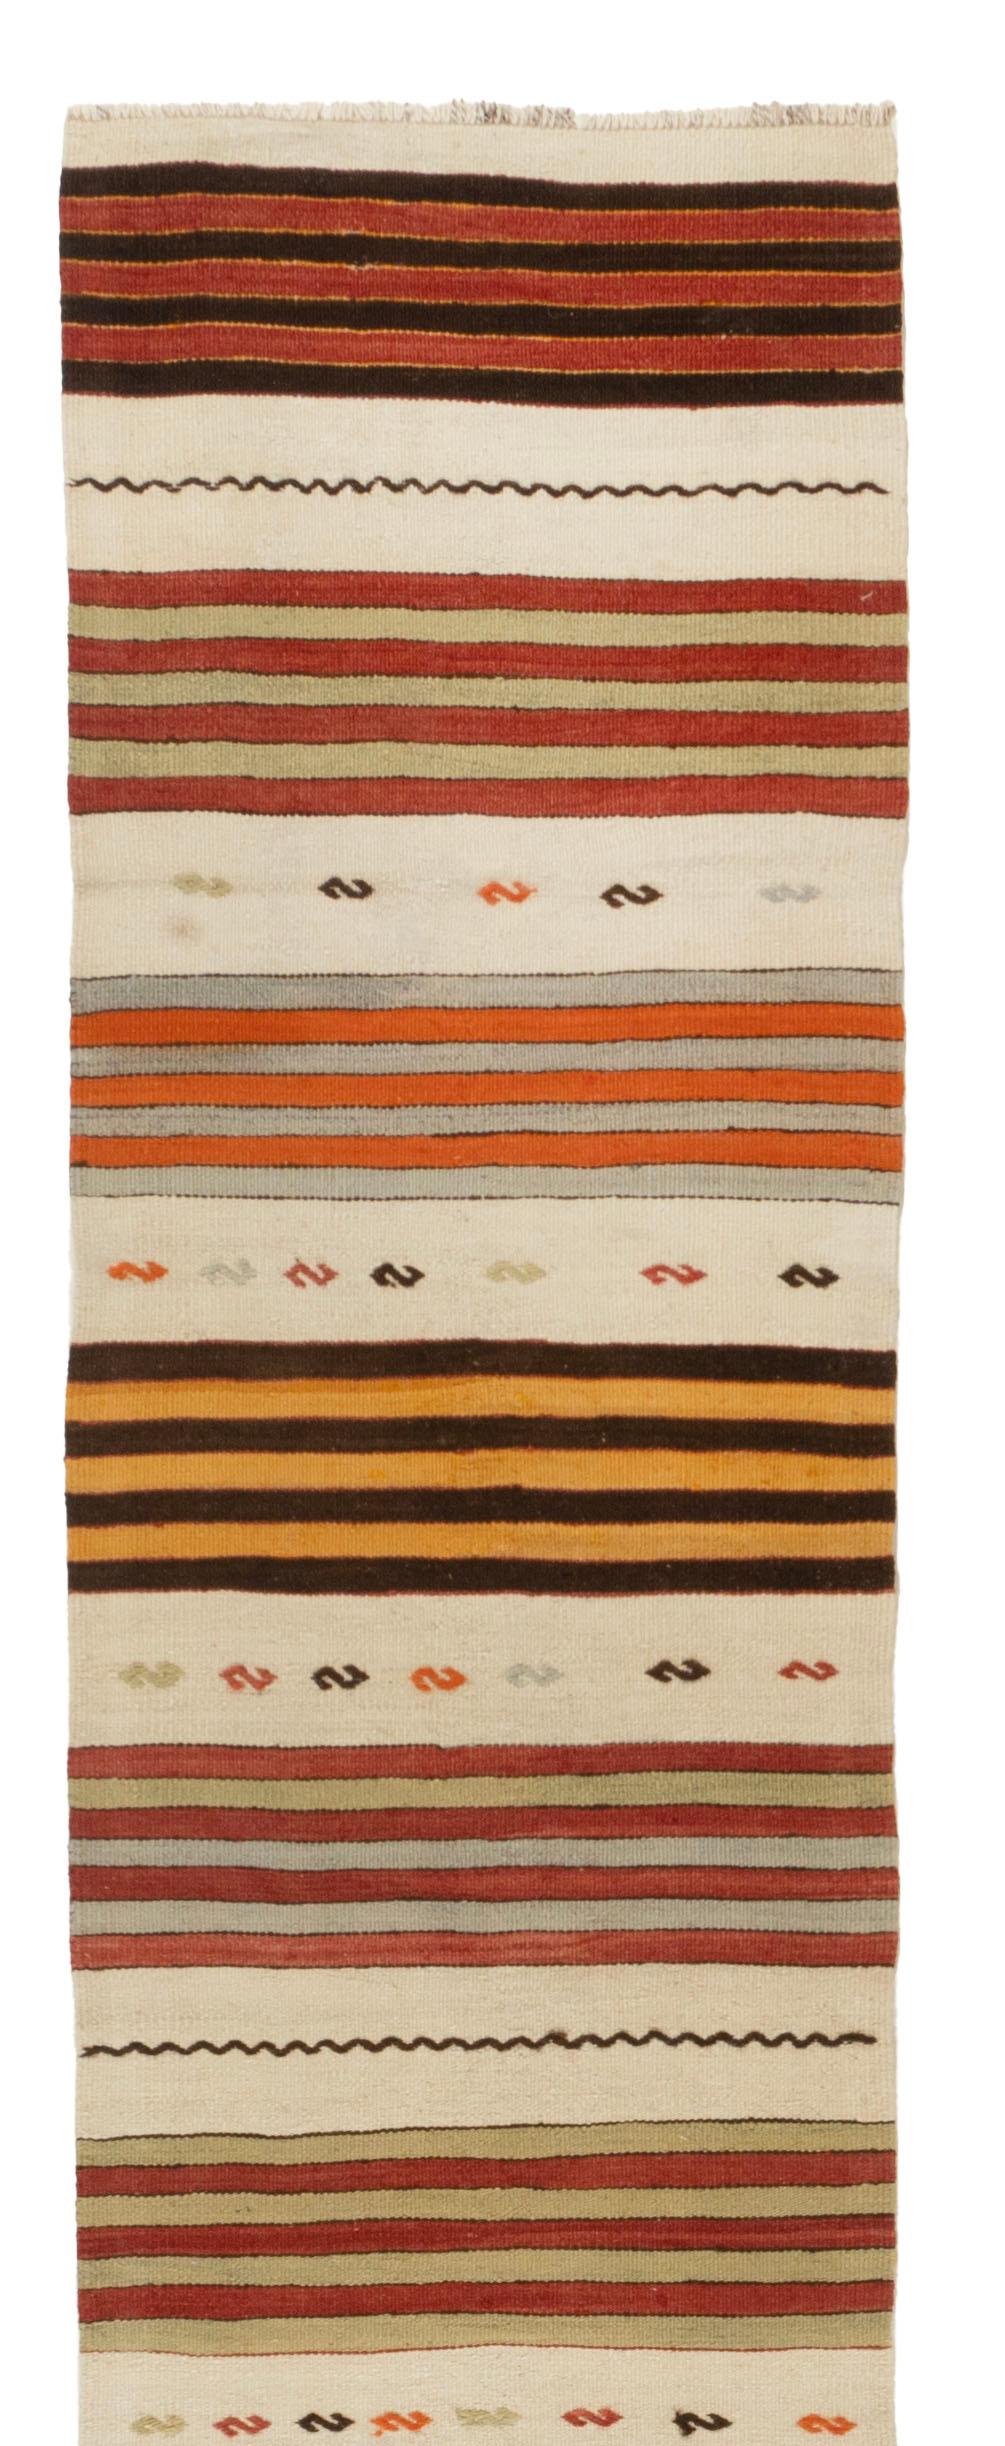 Vintage Turkish Kilim Runner 2' X 24' In Good Condition For Sale In New York, NY